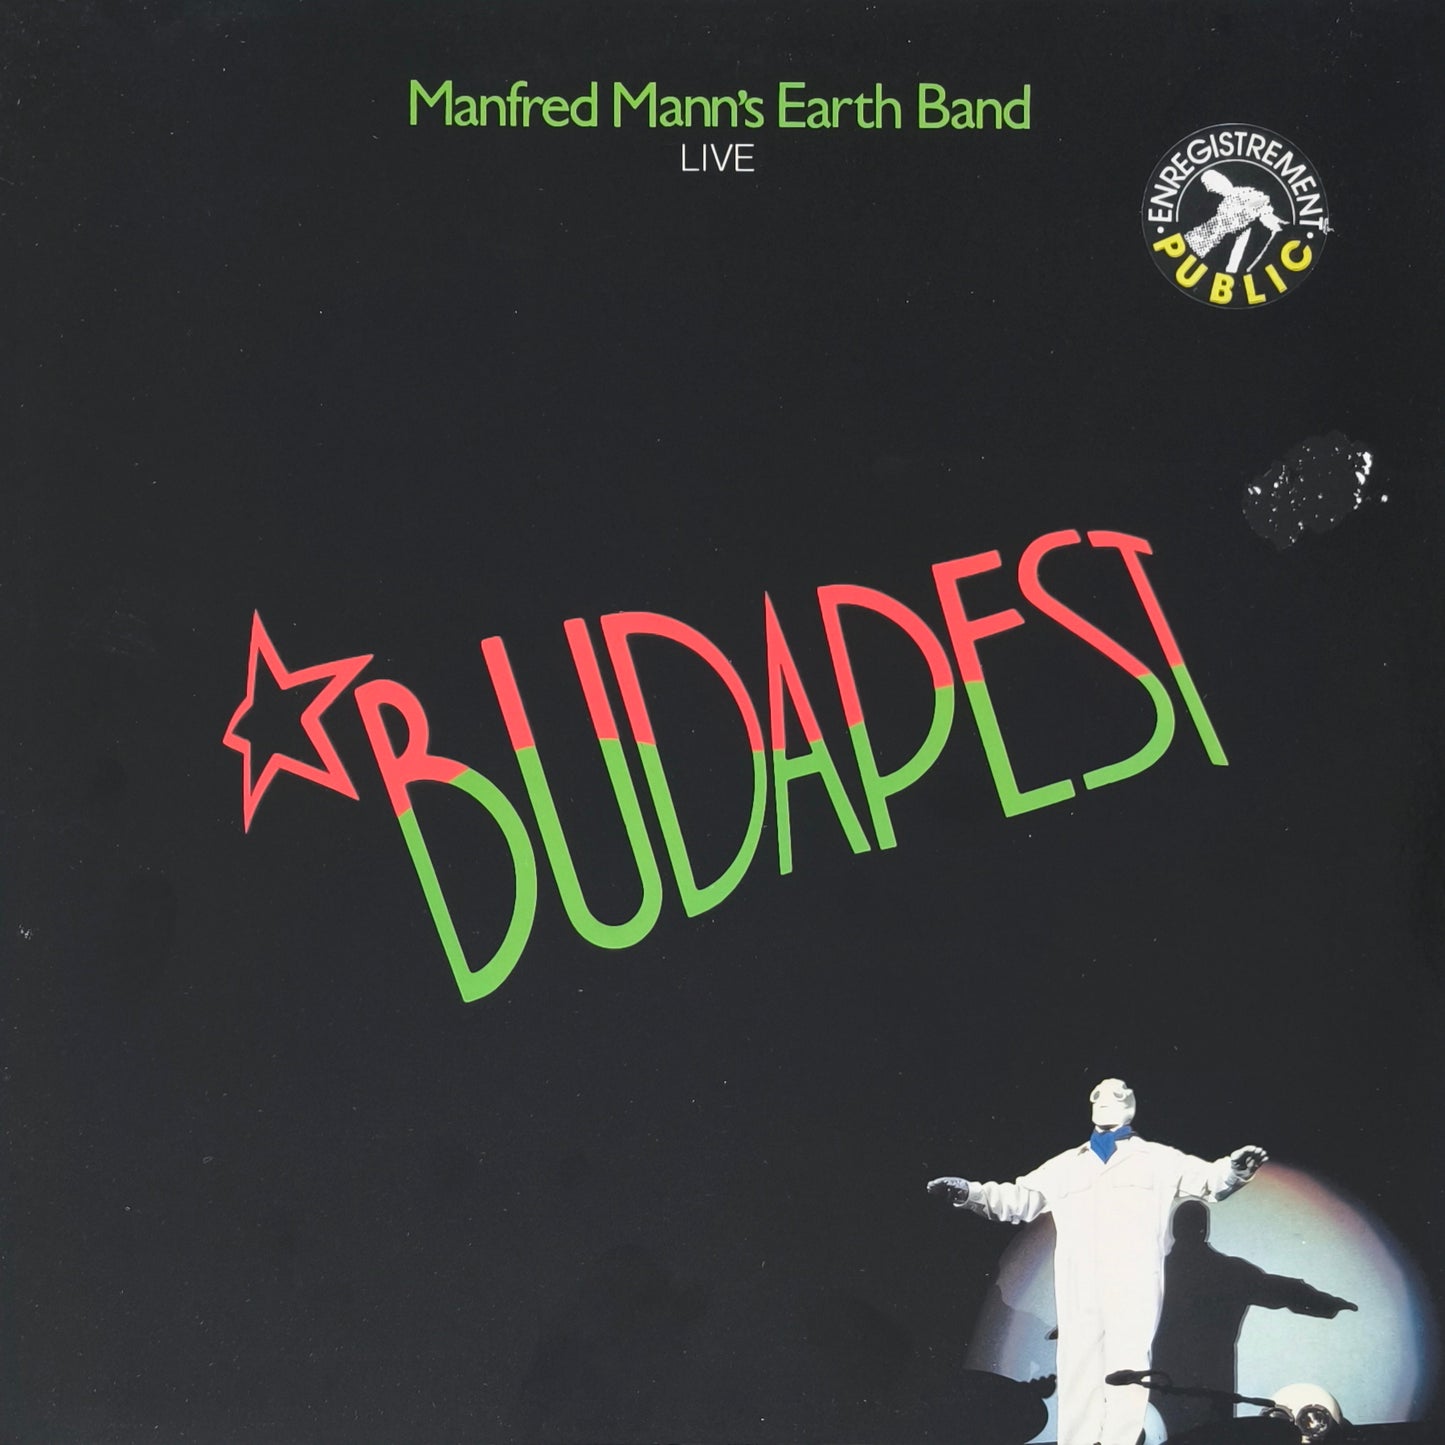 MANFRED MANN'S EARTH BAND - Budapest Live